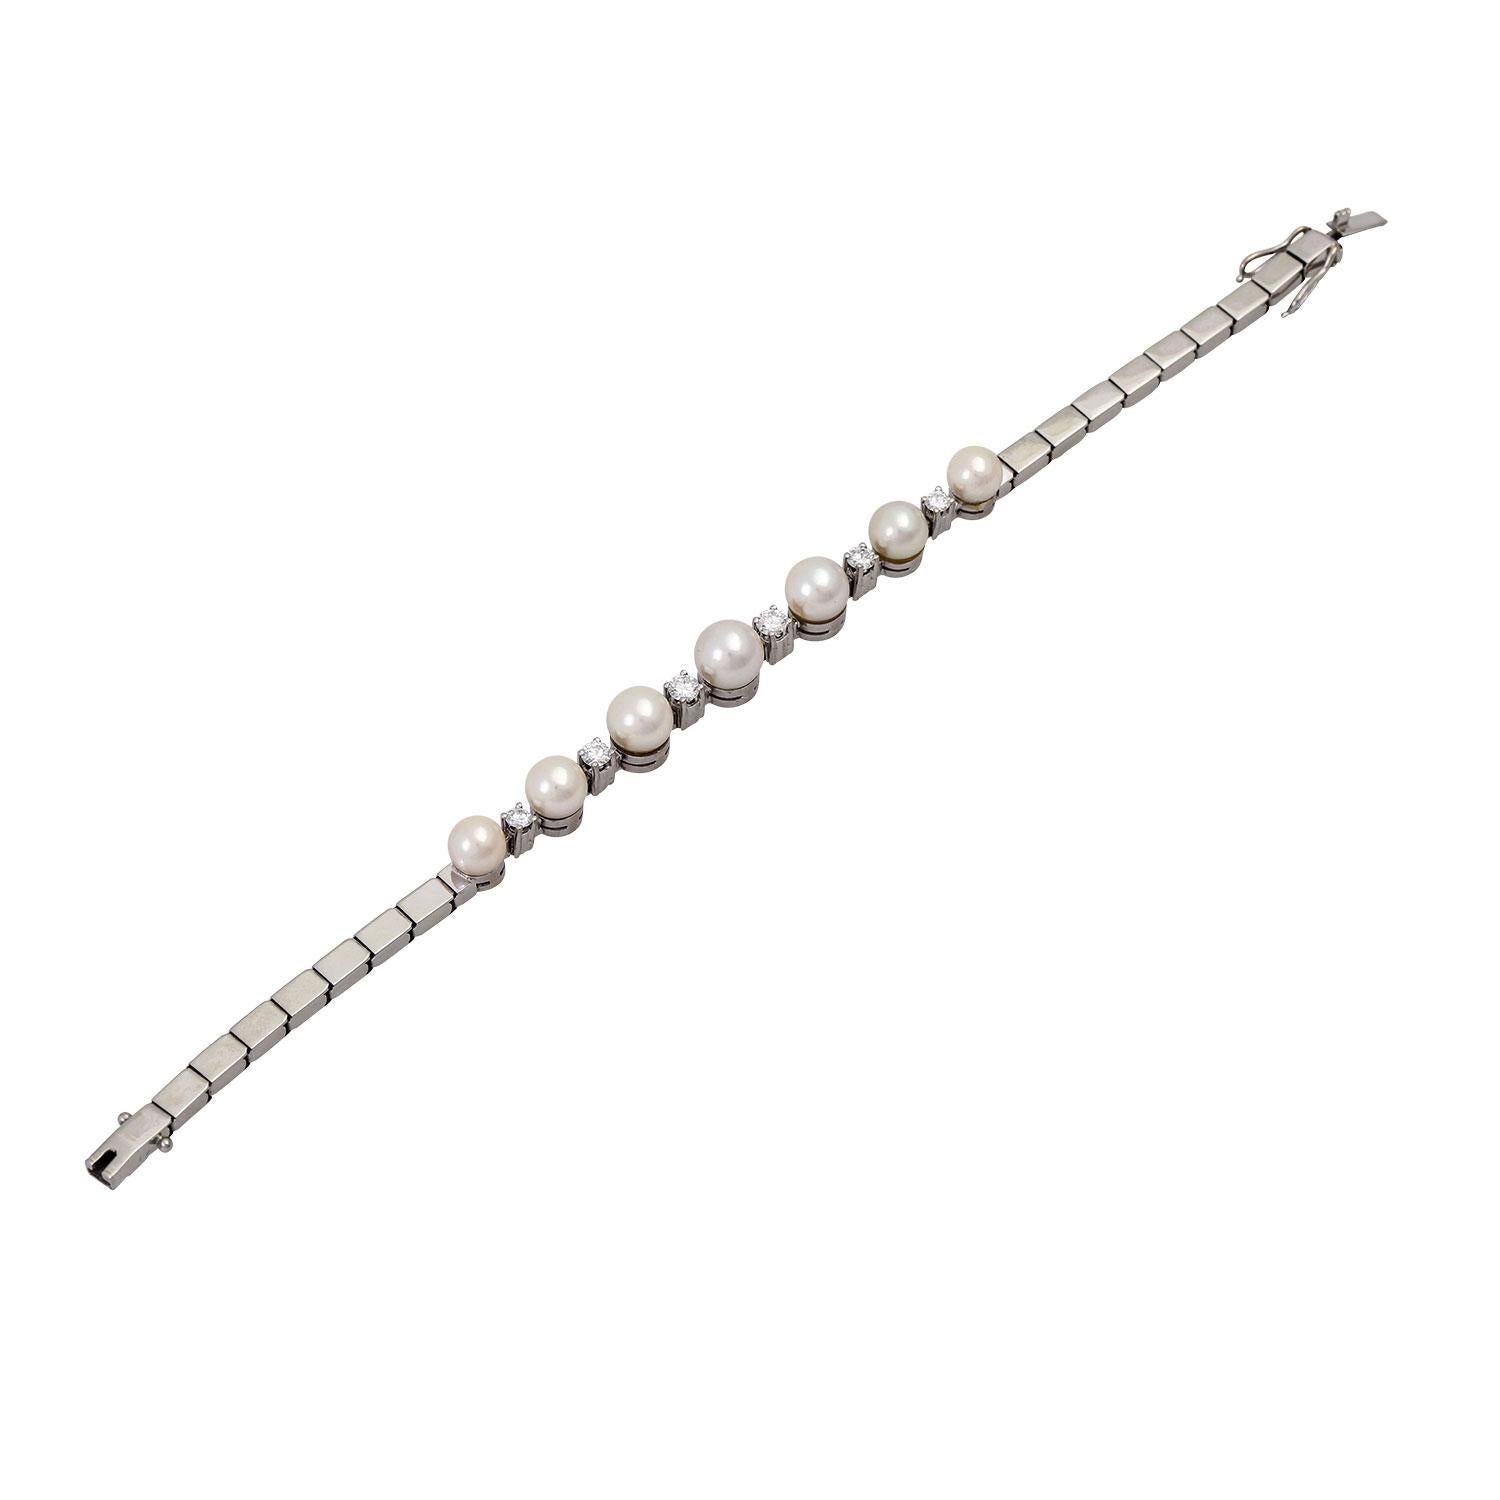 Uncut Bracelet with 7 cultured pearls For Sale